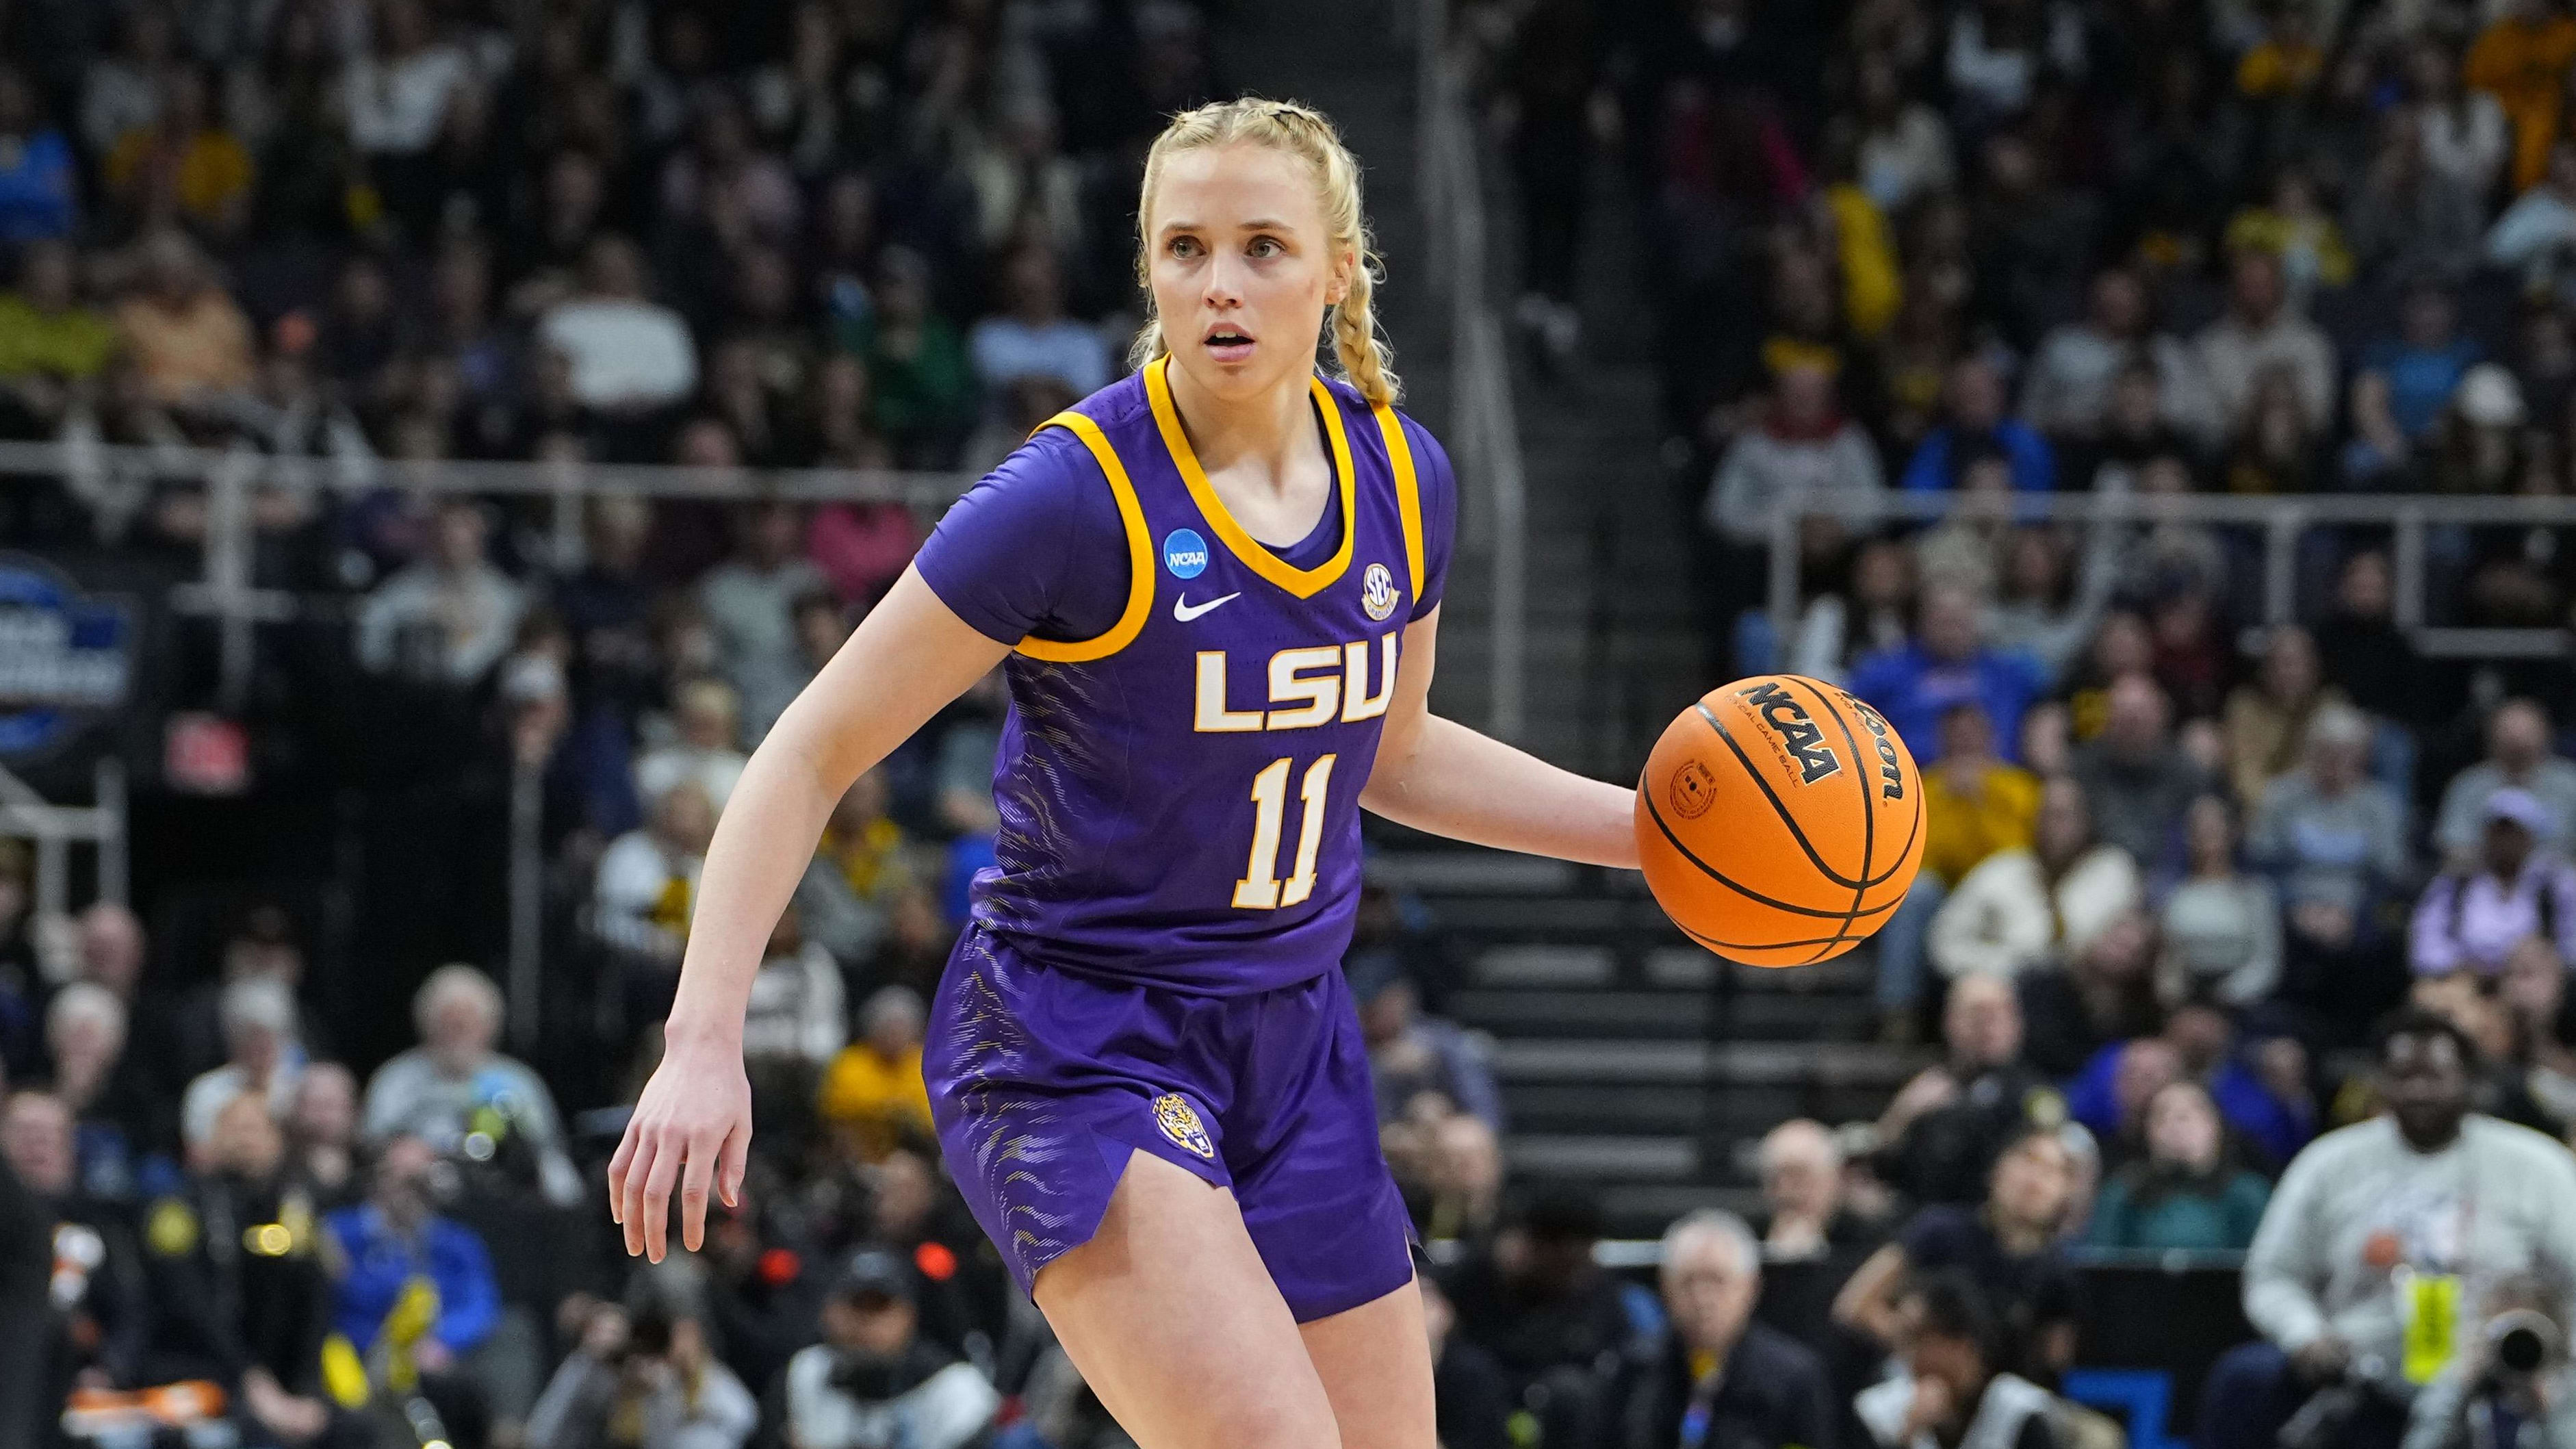 Hailey Van Lith dribbles the ball for LSU